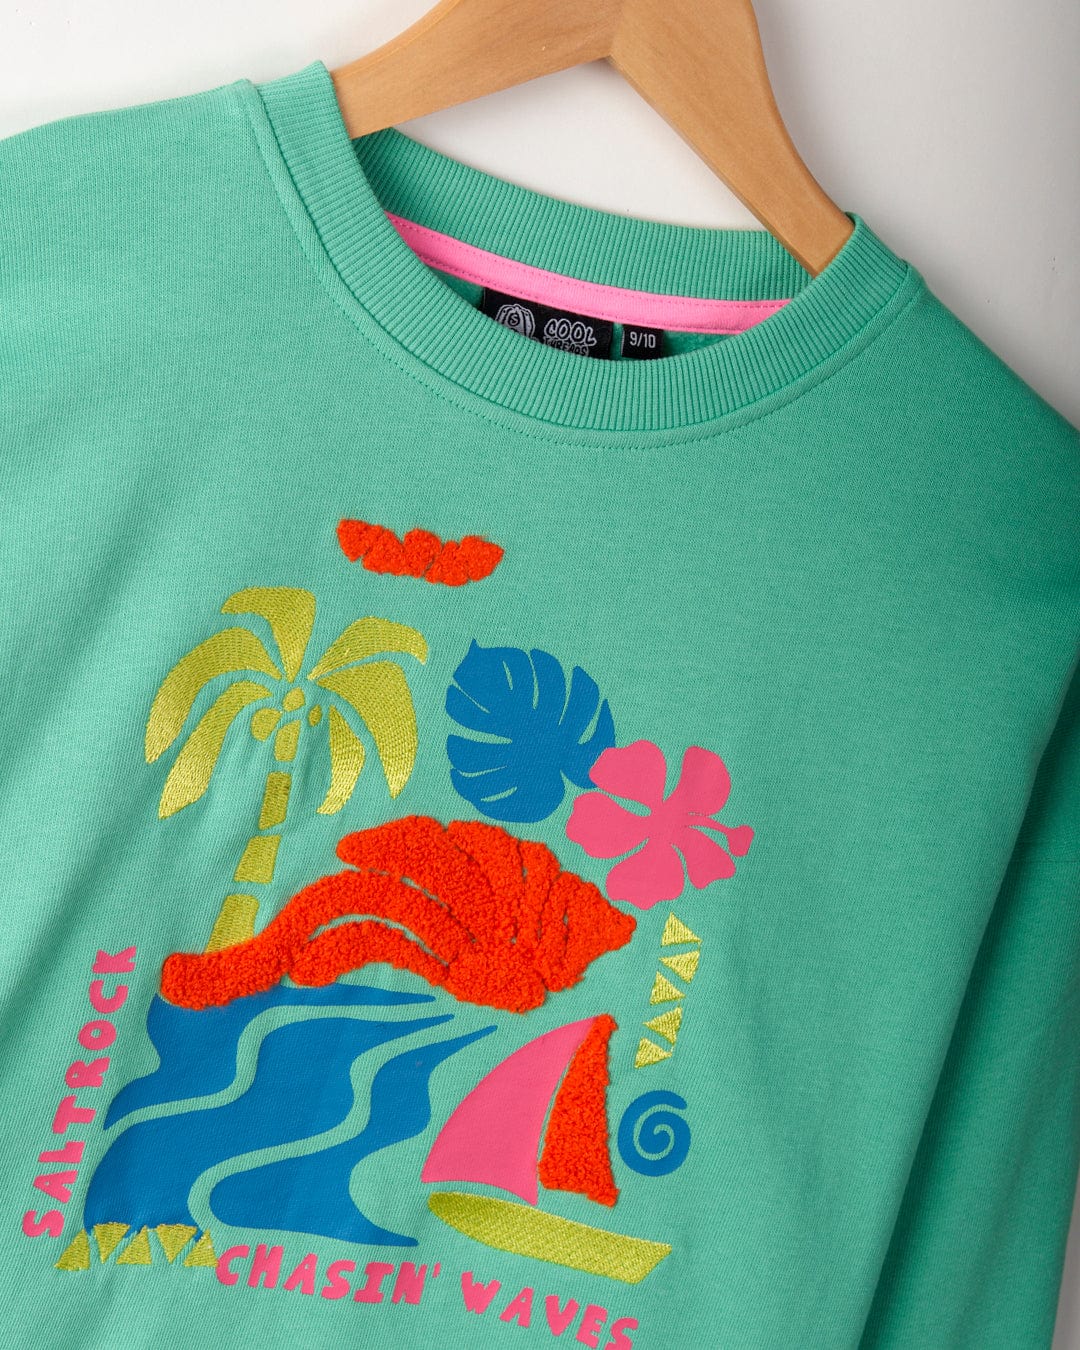 Green cropped-fit sweatshirt on a wooden hanger with vibrant beach-themed embroidered graphics. Featuring palm trees, waves, a sailboat, and the text "Saltrock" and "Chasin' Waves," the Summer Block - Kids Sweat - Green from Saltrock is perfect for those who love Saltrock branding and coastal vibes.